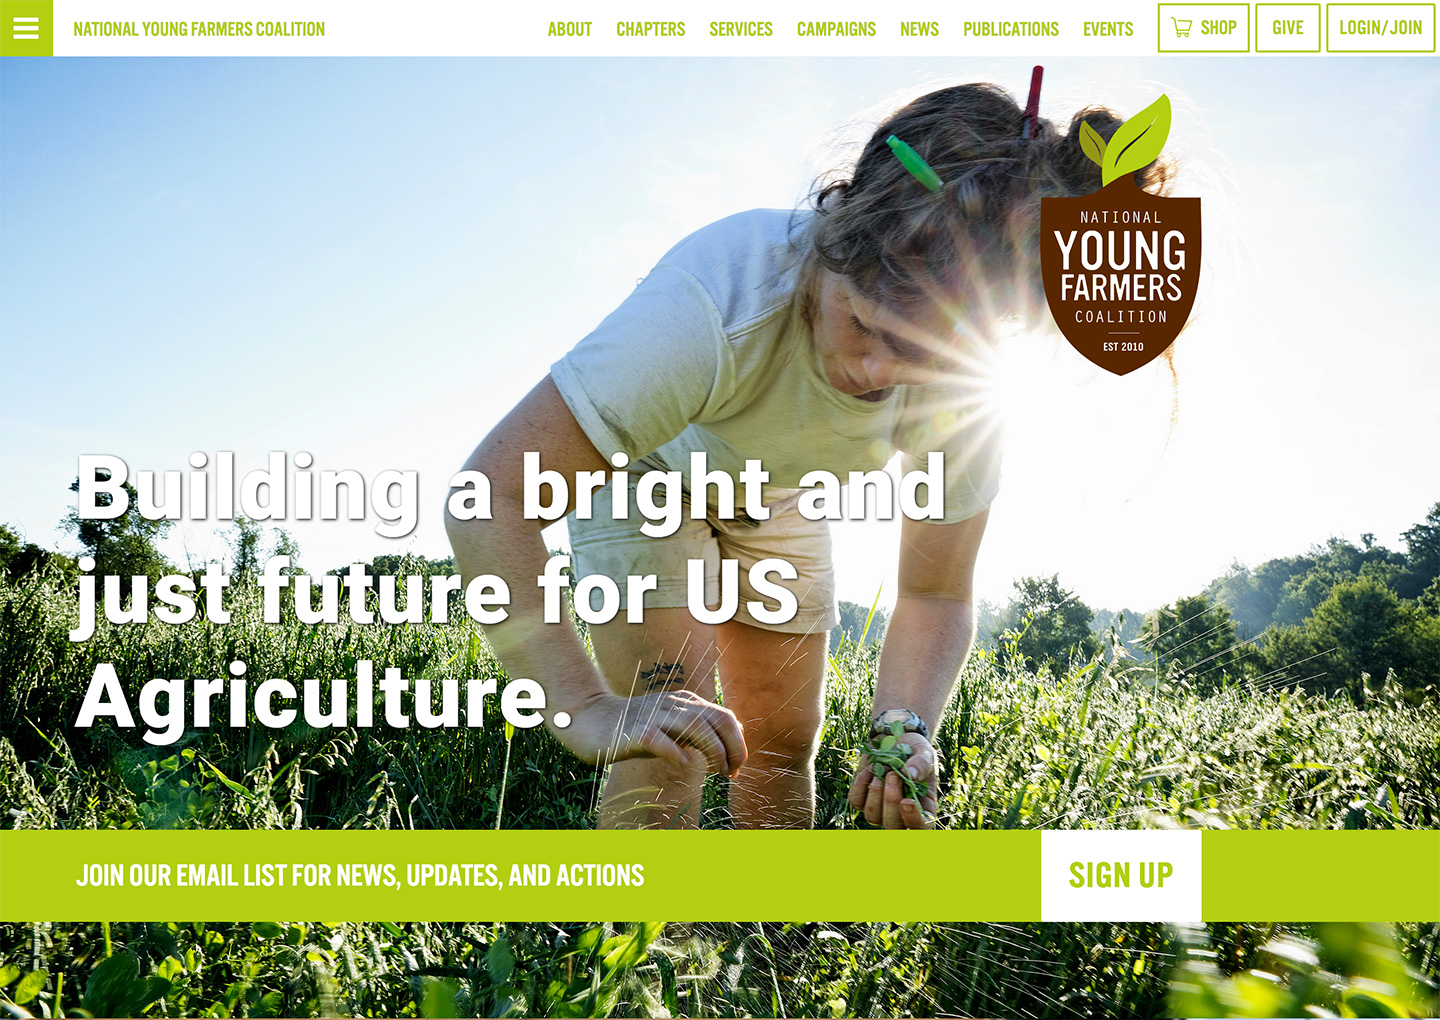 Online Agriculture Advocacy with the National Young Farmers Coalition